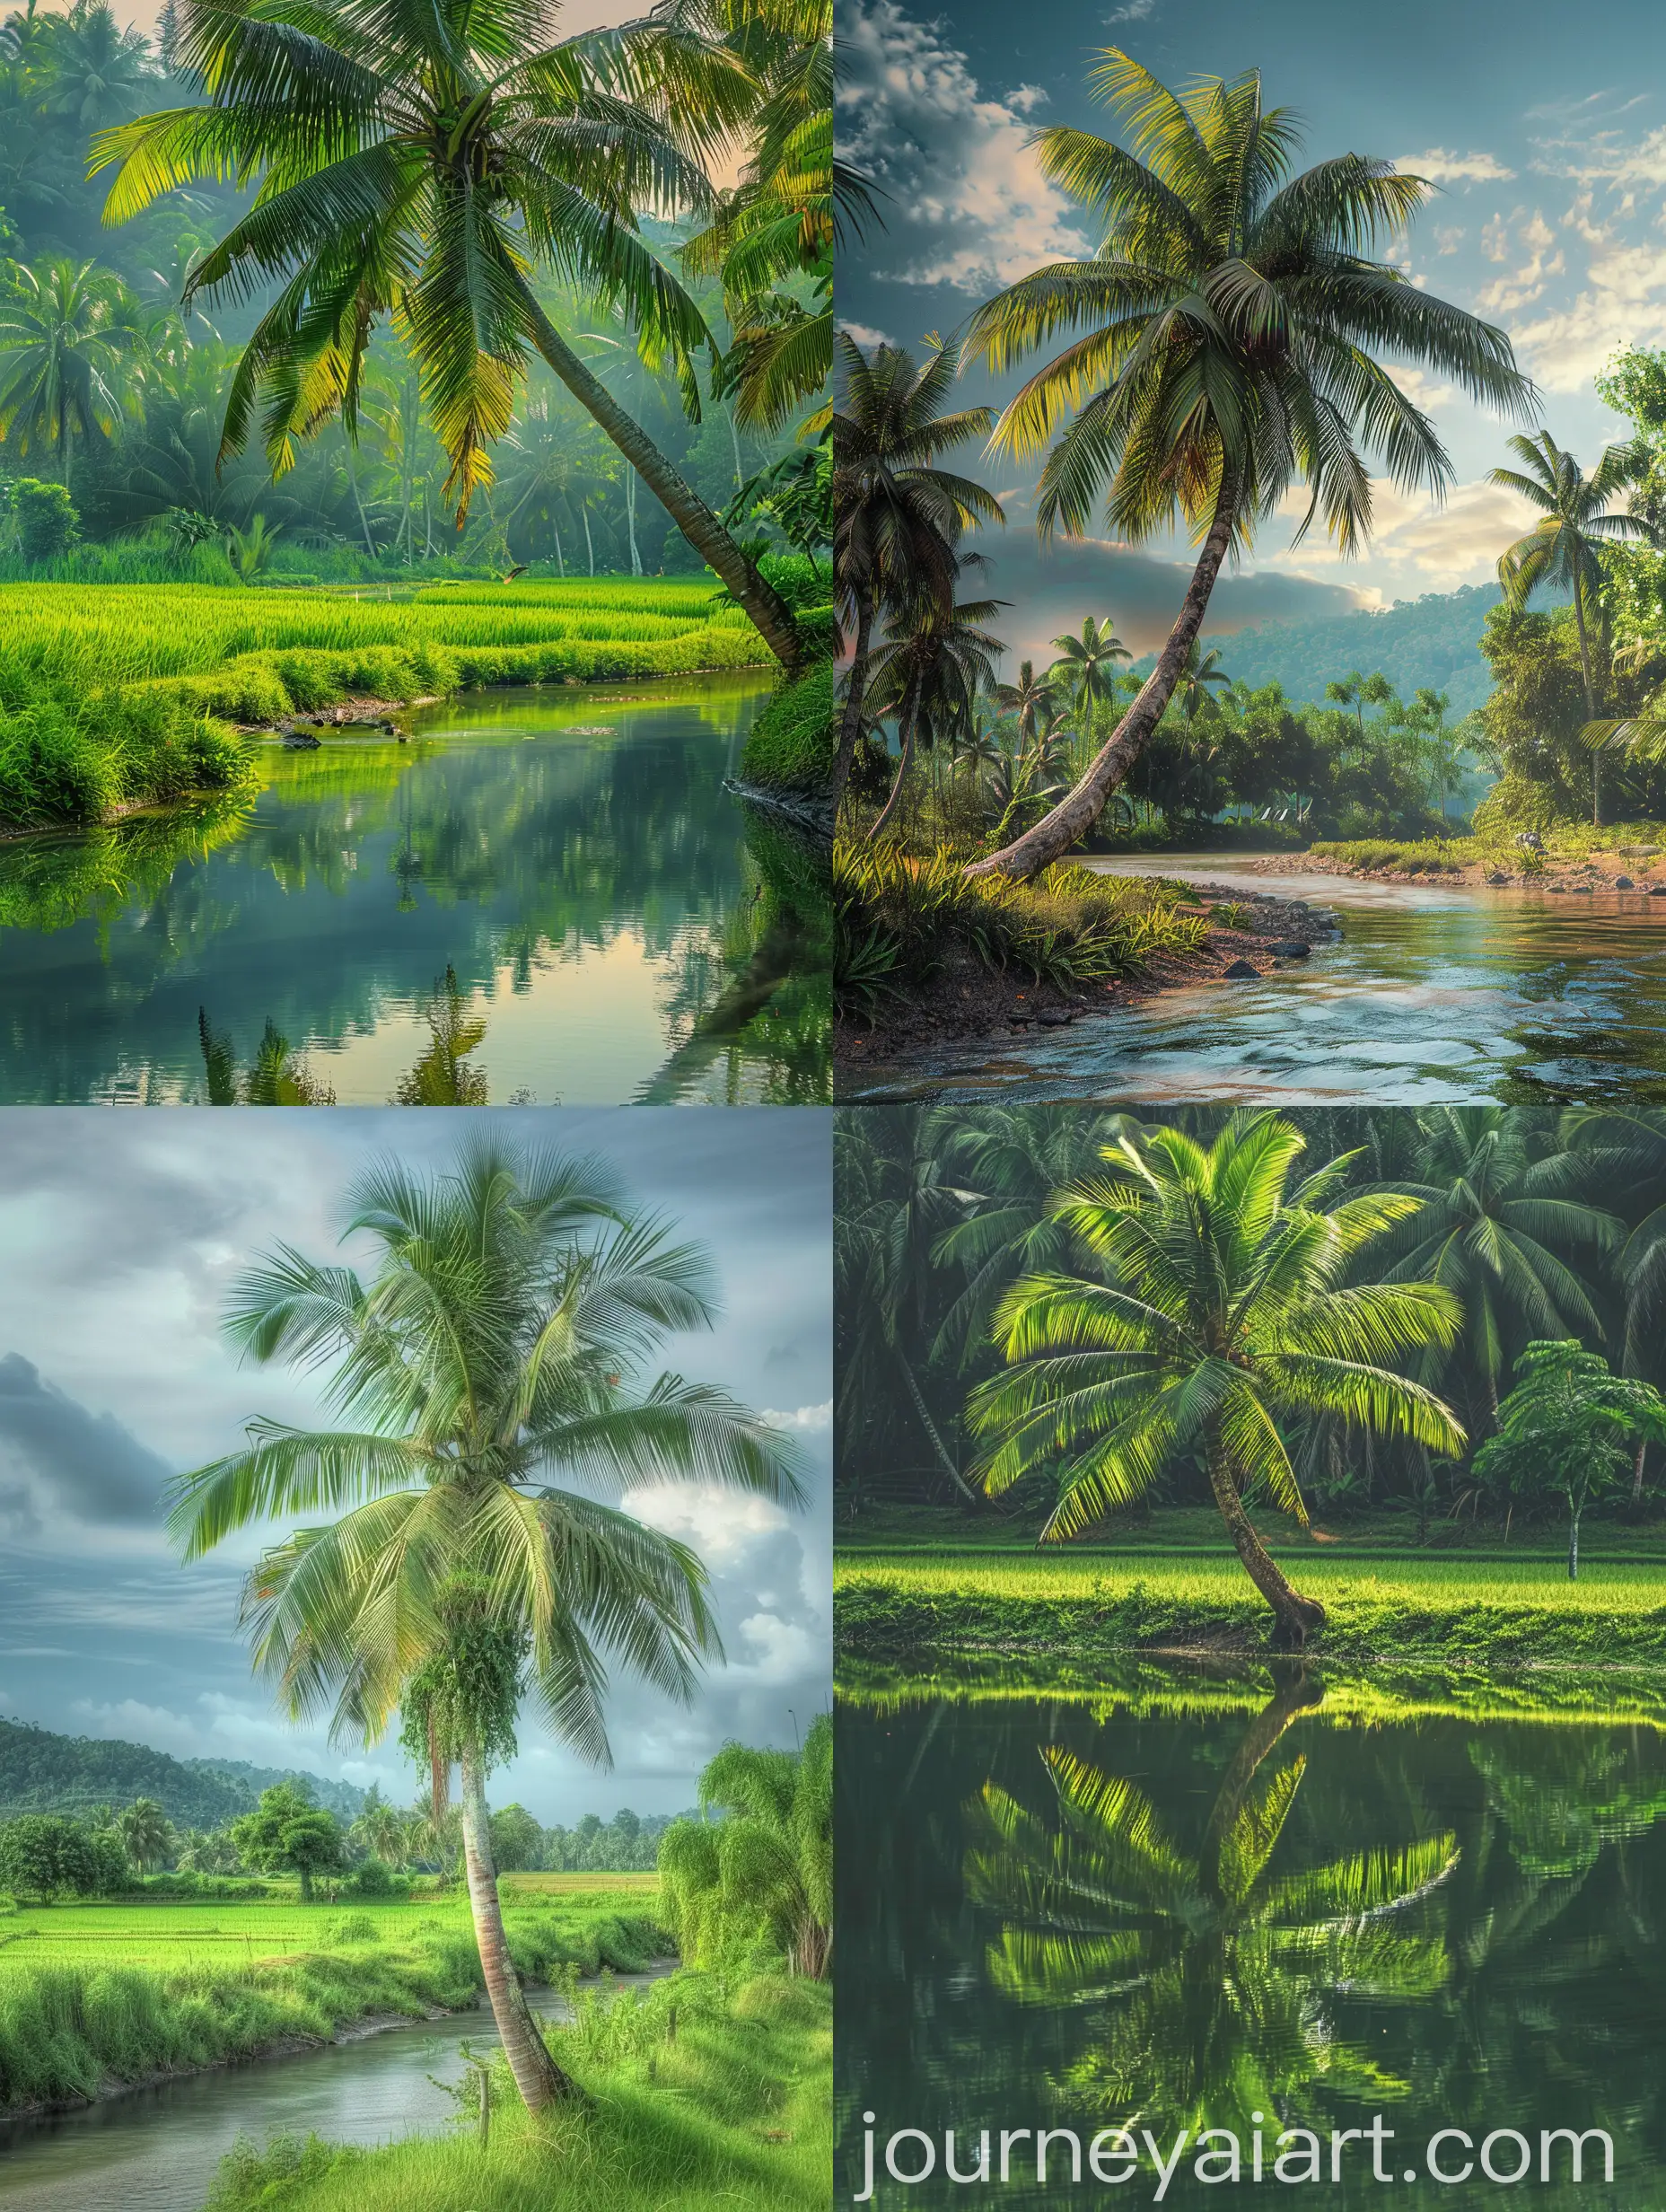 Scenic-Coconut-Tree-with-River-Reflections-and-Paddy-Fields-Landscape